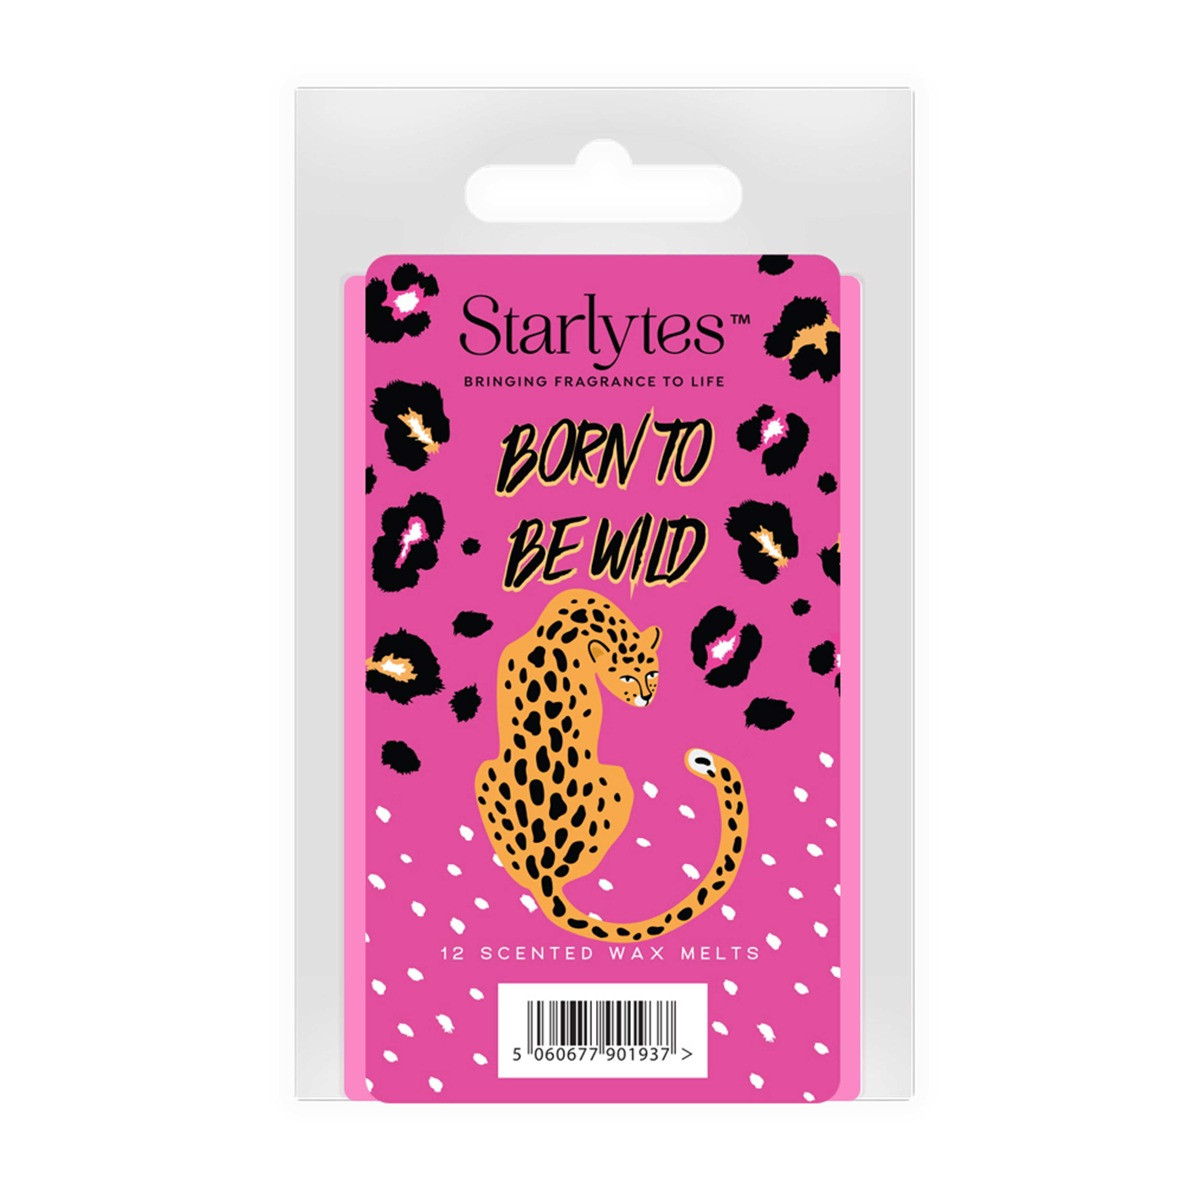 Starlytes Wax Melts 12 Pack - Born To Be Wild>